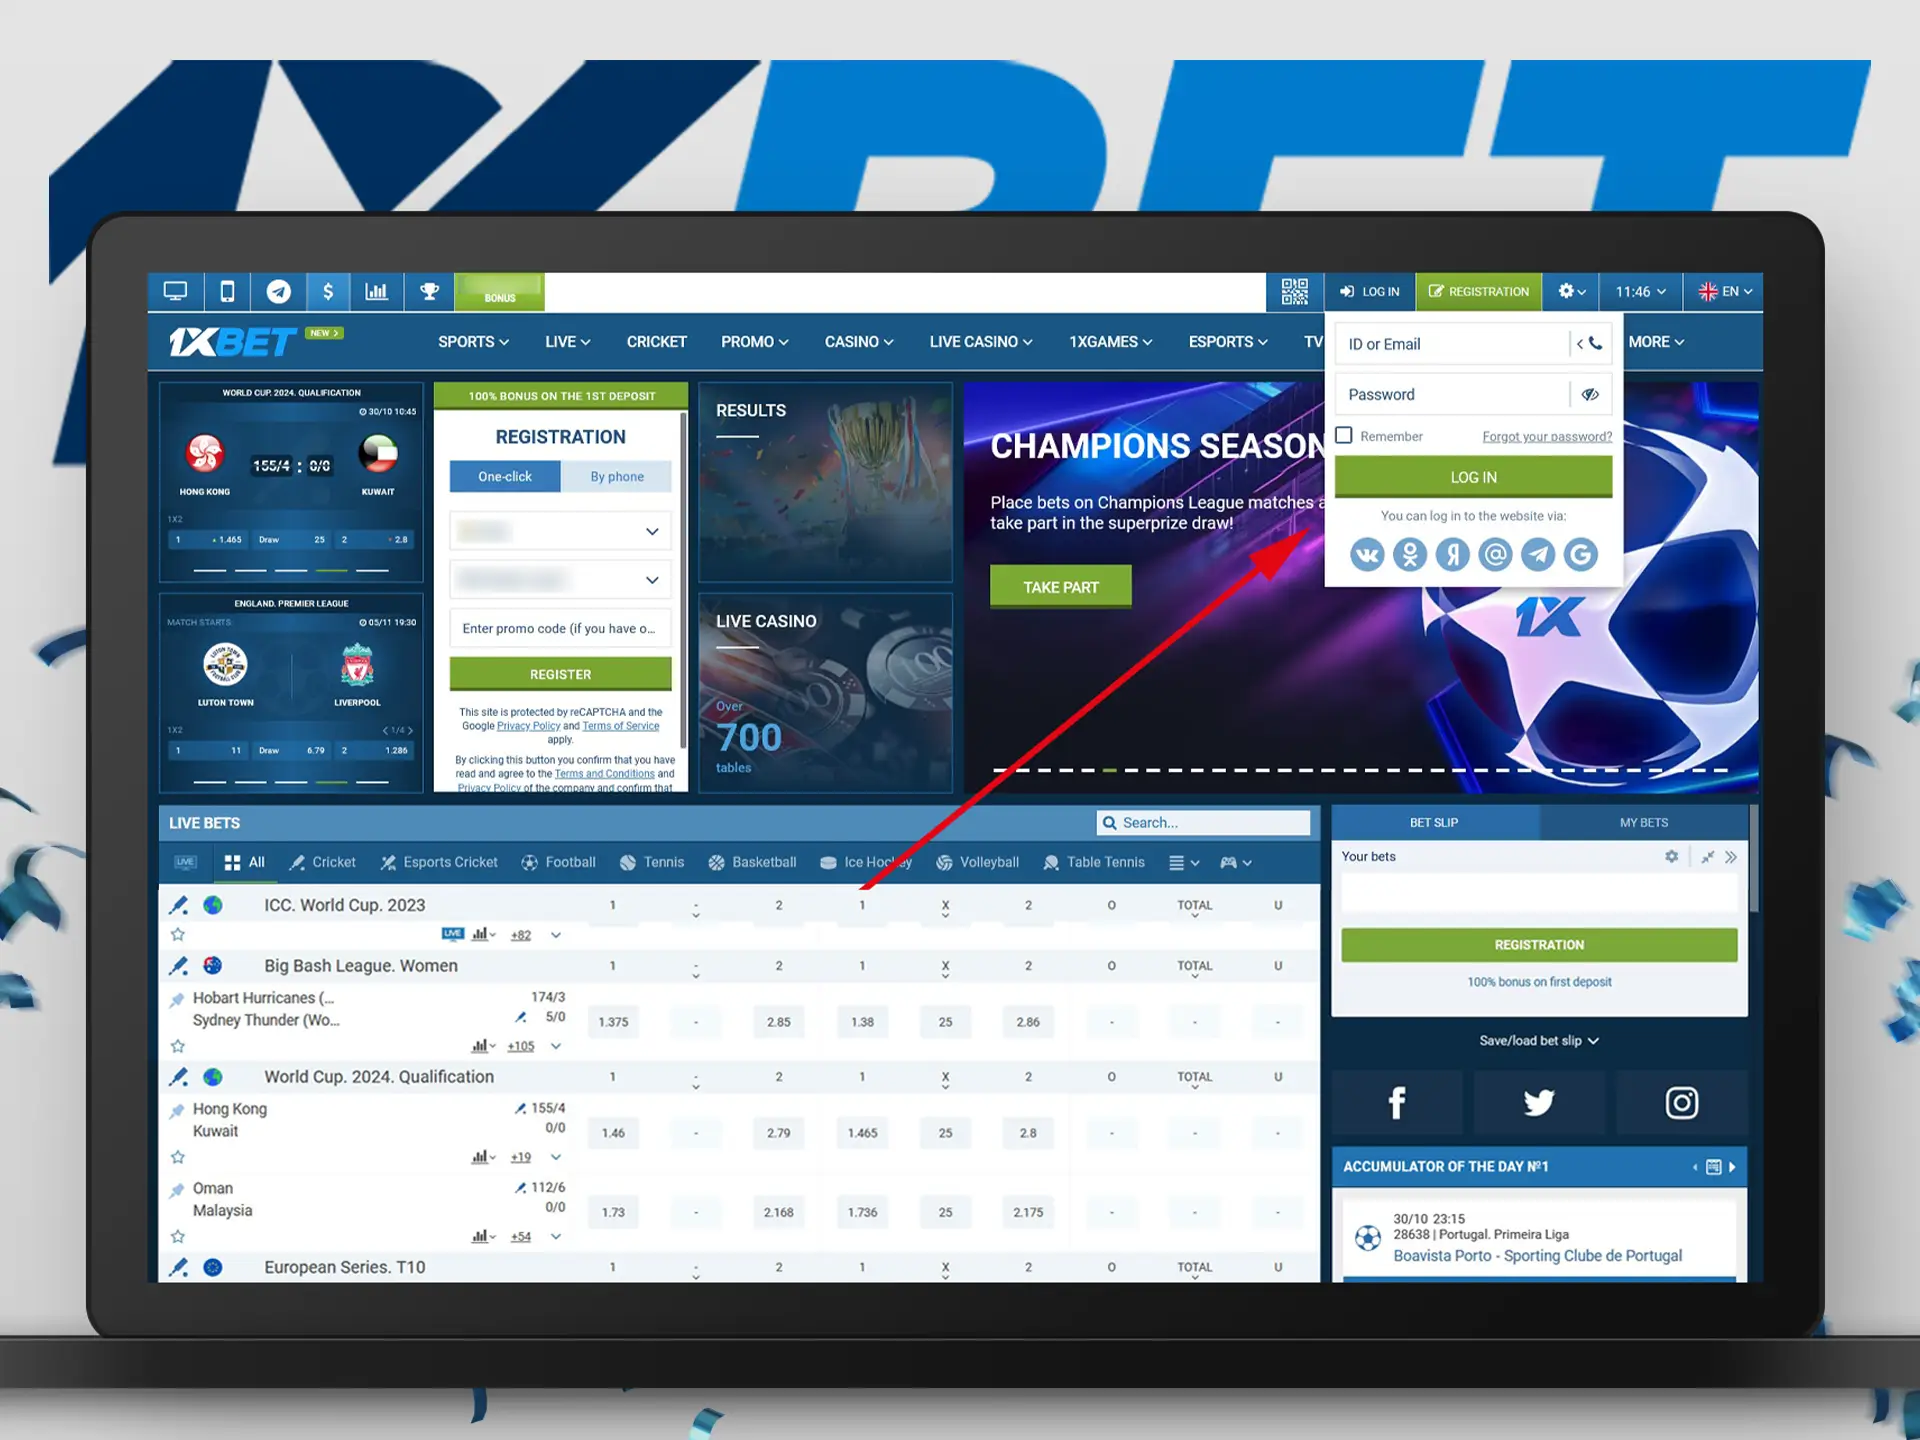 To login your 1xBet profile, enter your 1xBet account username and password.